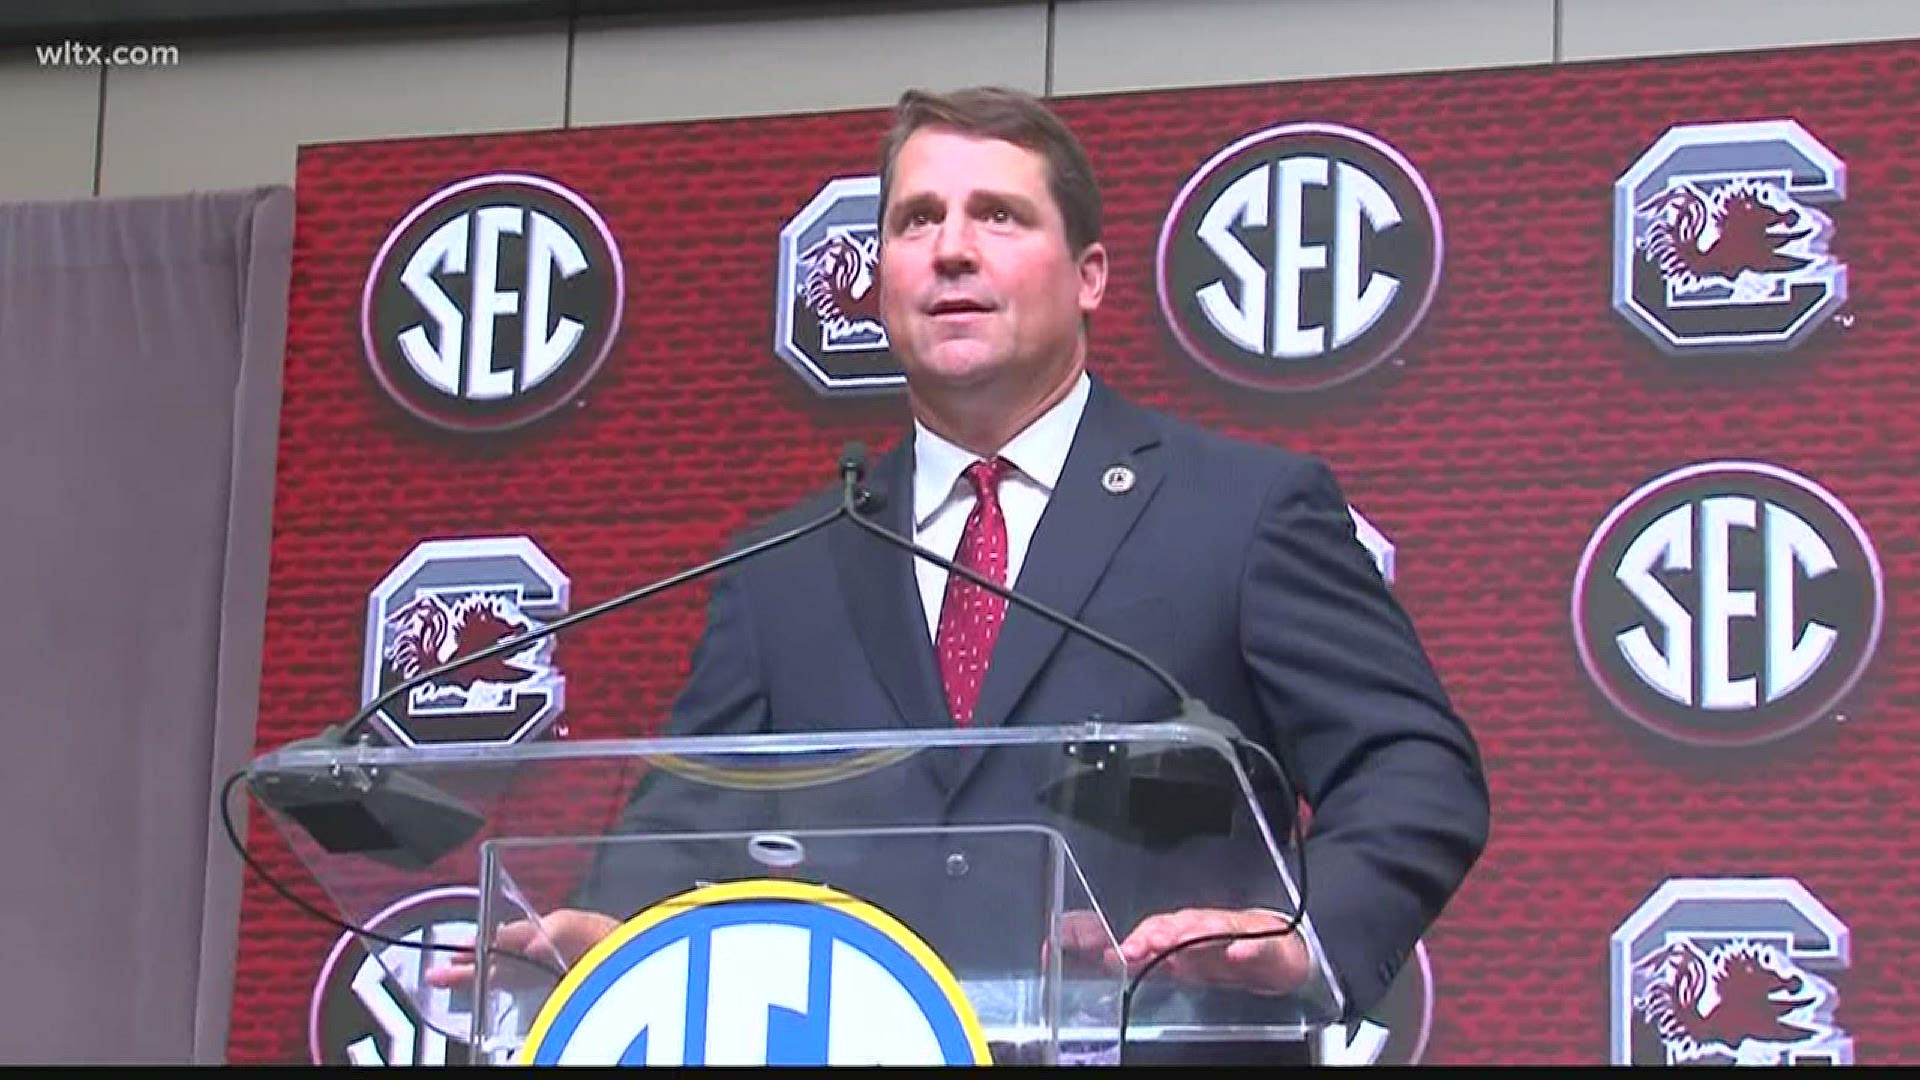 SEC Media Days will be next month but it will not have the same intensity with swarms of media members surrounding coaches and players.